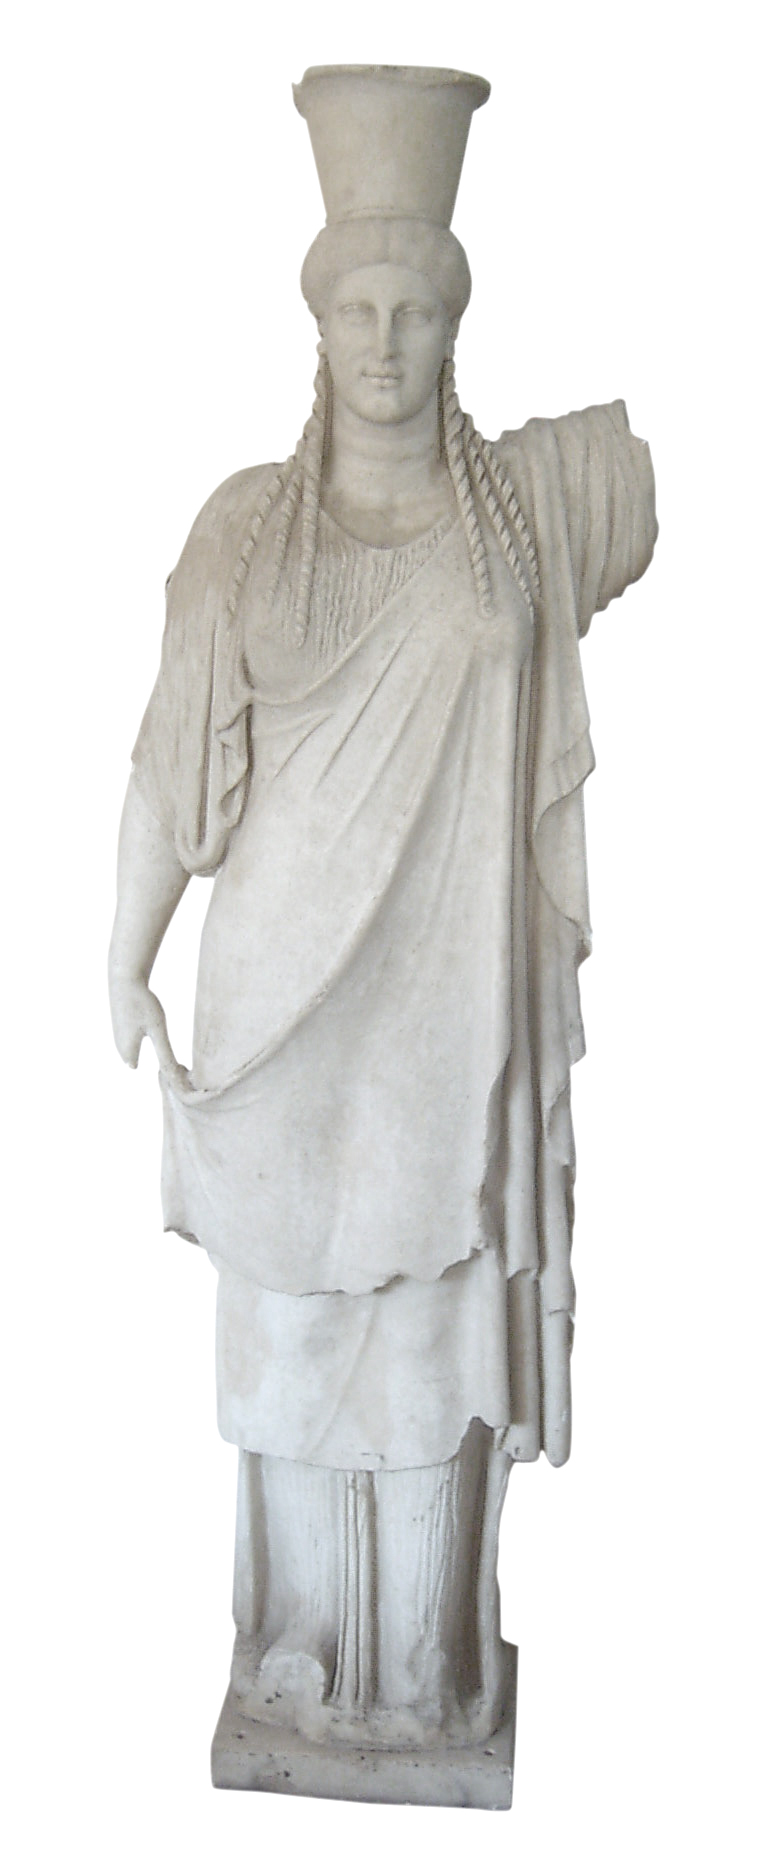 Marble statue of Caryatid from Tralles